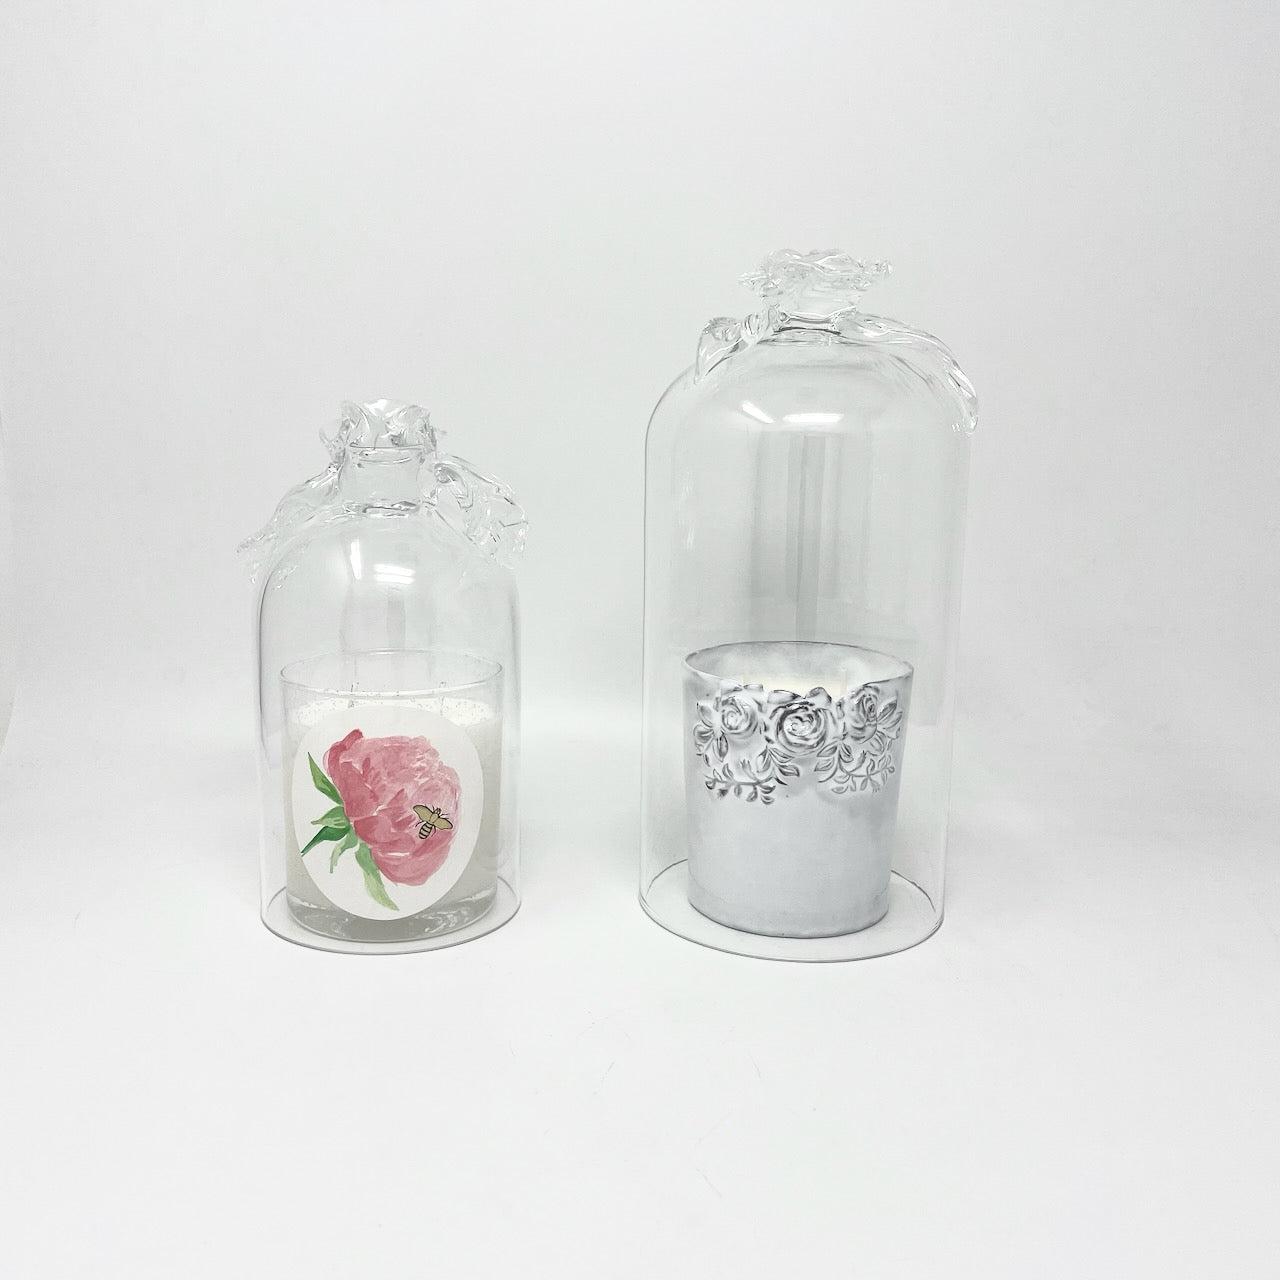 Rose-handle glass bell cloche